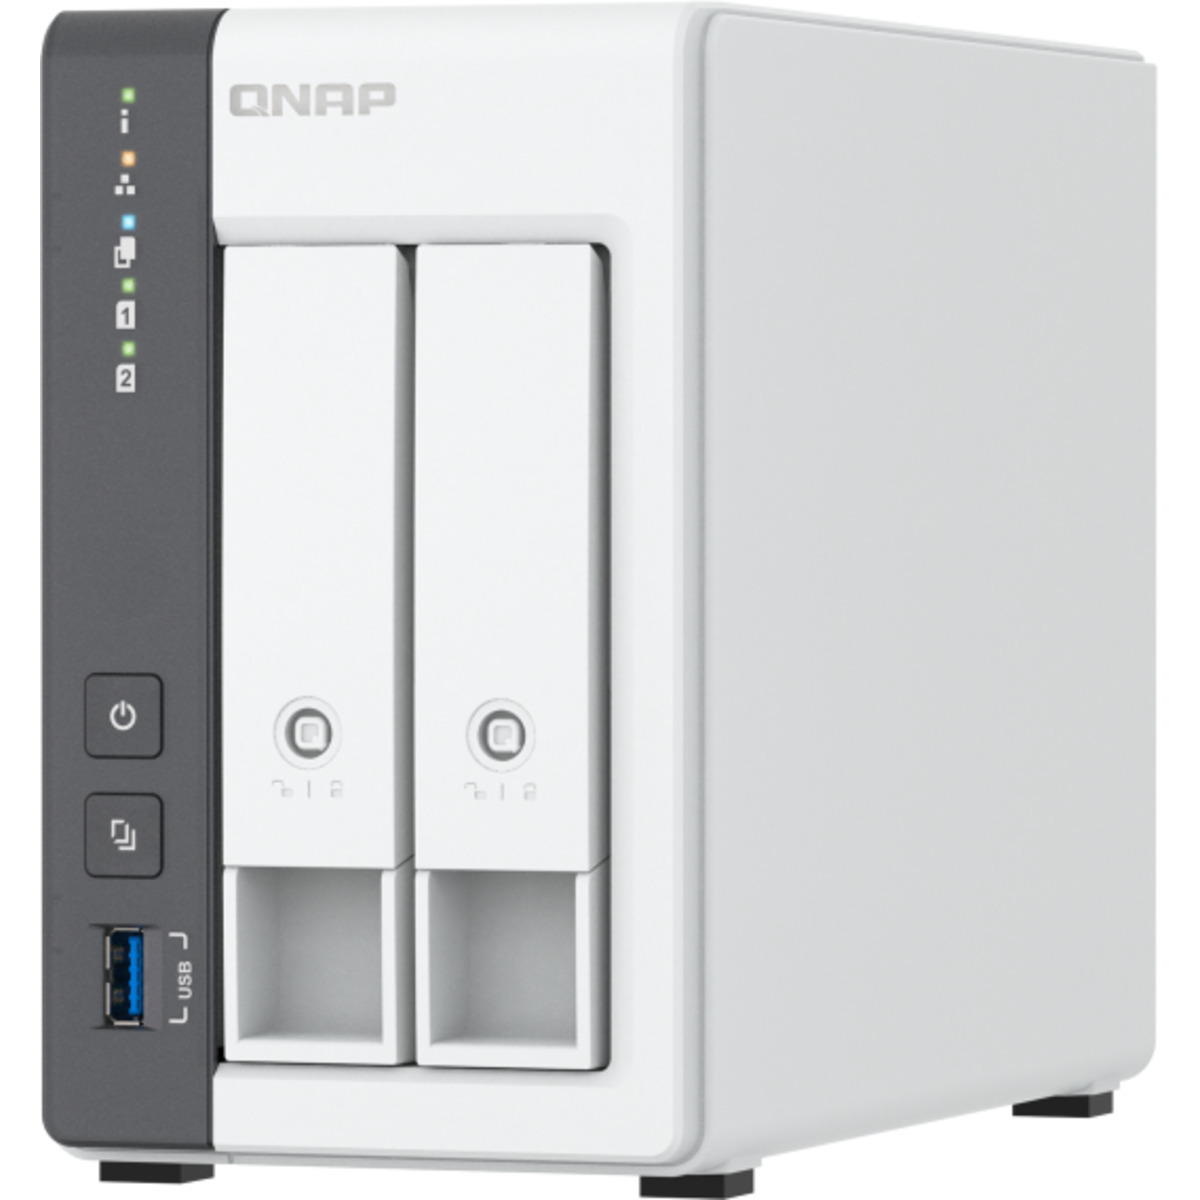 QNAP TS-216G 2tb 2-Bay Desktop Personal / Basic Home / Small Office NAS - Network Attached Storage Device 1x2tb Sandisk Ultra 3D SDSSDH3-2T00 2.5 560/520MB/s SATA 6Gb/s SSD CONSUMER Class Drives Installed - Burn-In Tested TS-216G